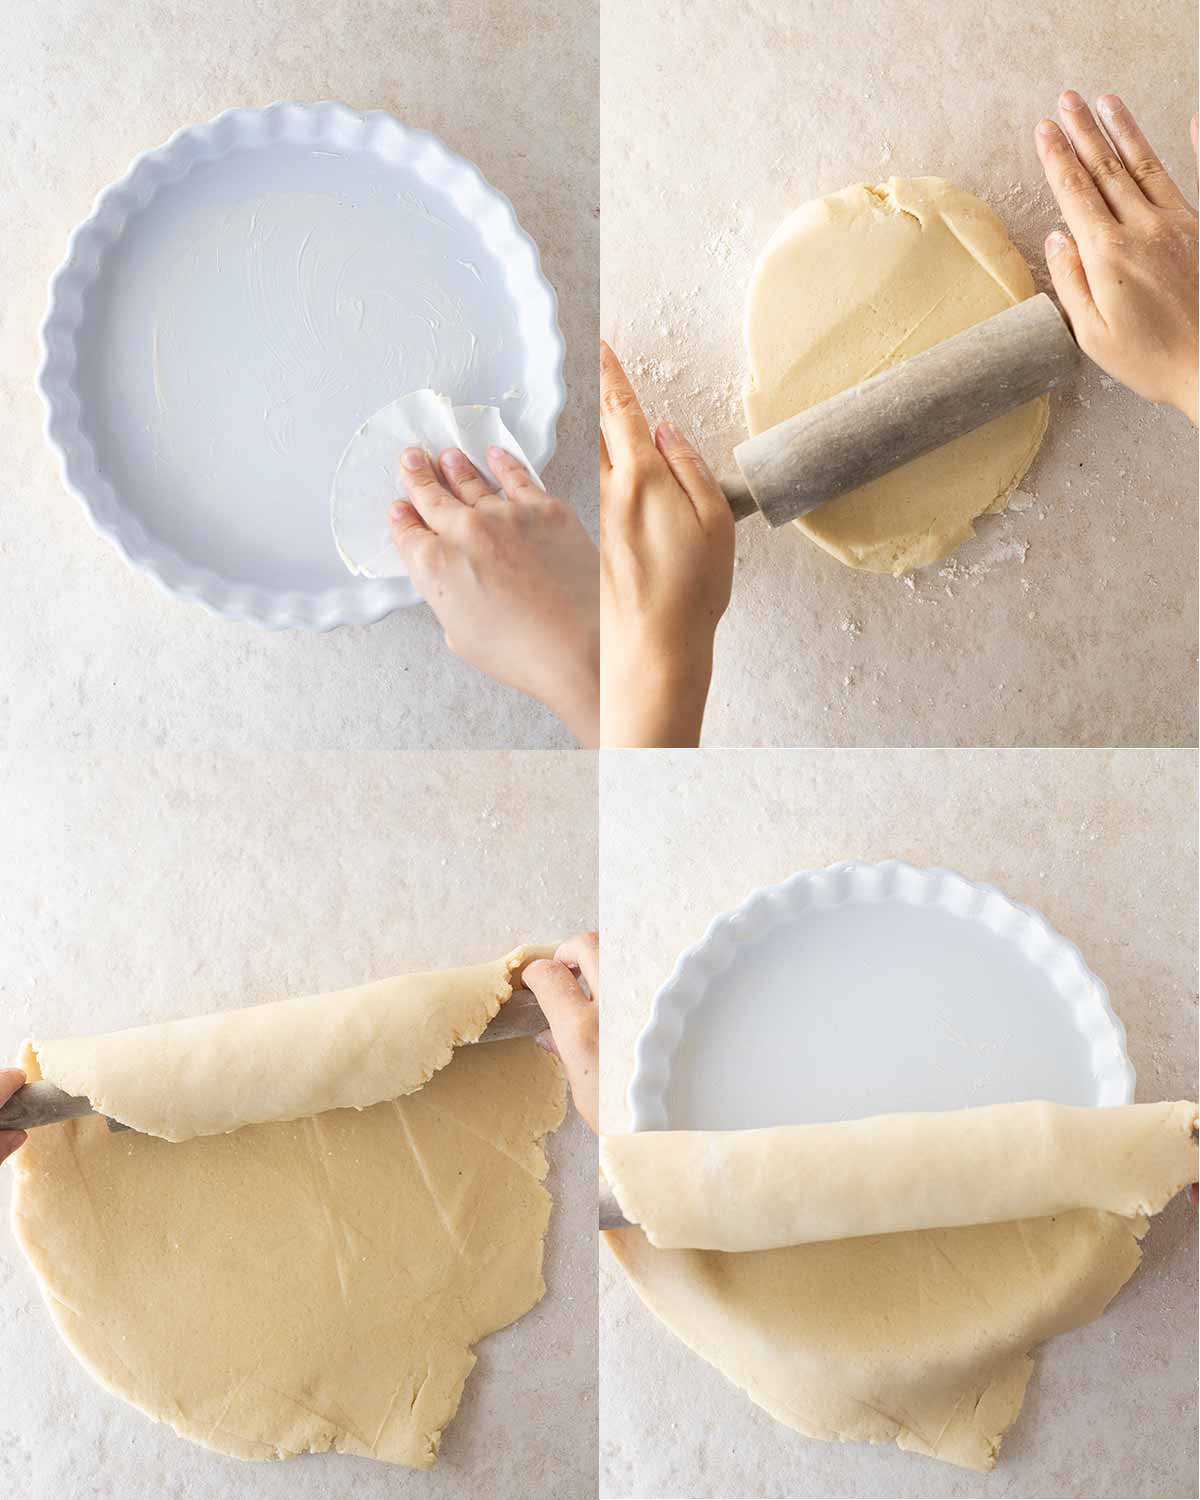 Four image collage showing how to prepare the pie dish and pastry. Images show hand greasing pie dish with parchment paper, hands rolling out buttery shortcrust pastry, pastry rolled around a rolling pin and the pastry being placed on top of the greased pie dish